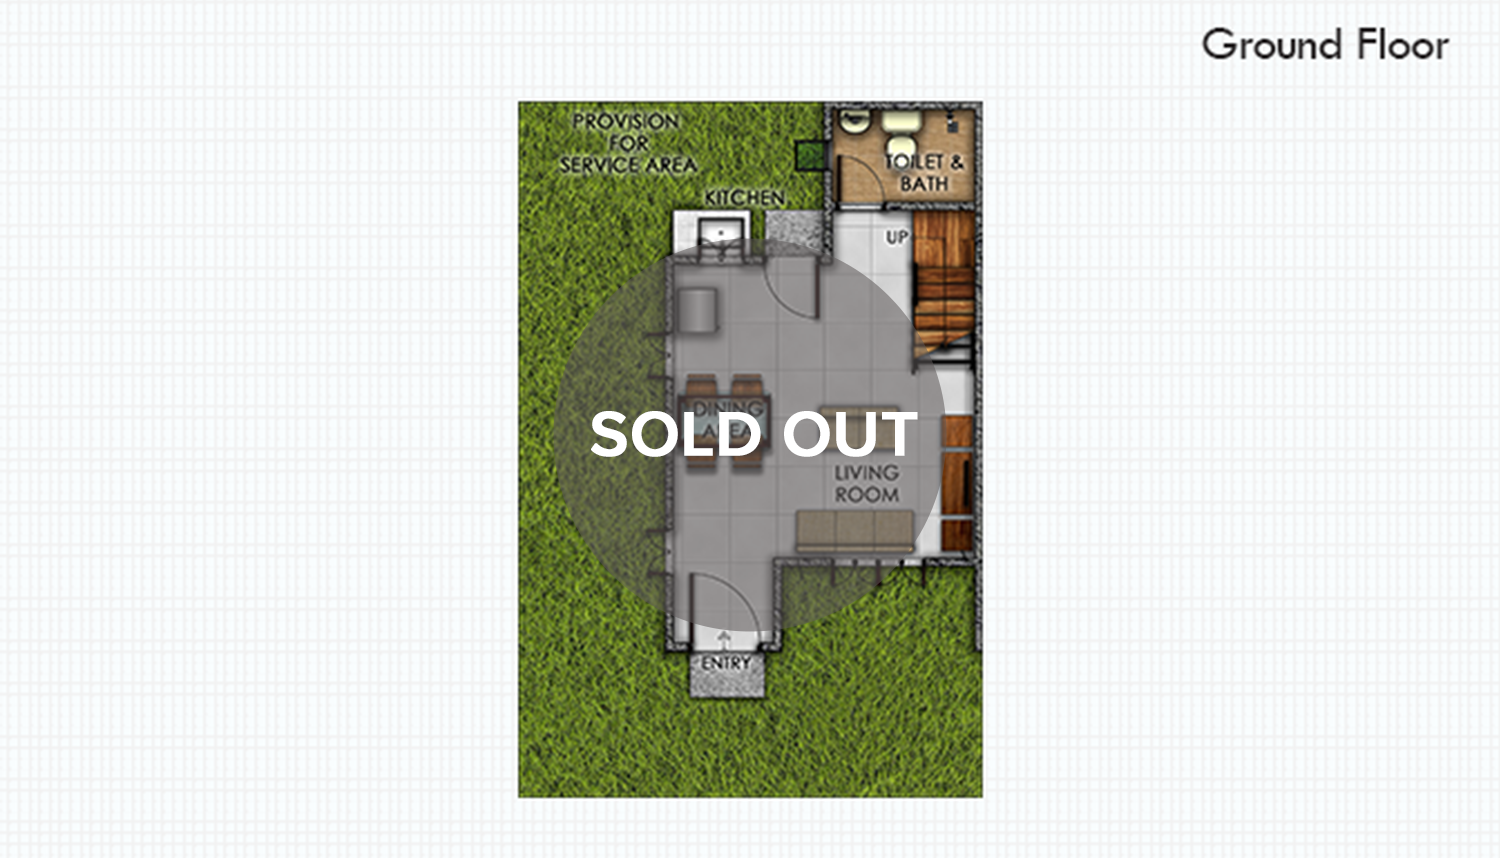 /assets/properties-house-model-gallery-and-landmarks-icons/lumina-home-models/home-model-gallery/angeli-single-firewall/lumina-angeli-single-firewall-ground-floor-plan-sold-out.png